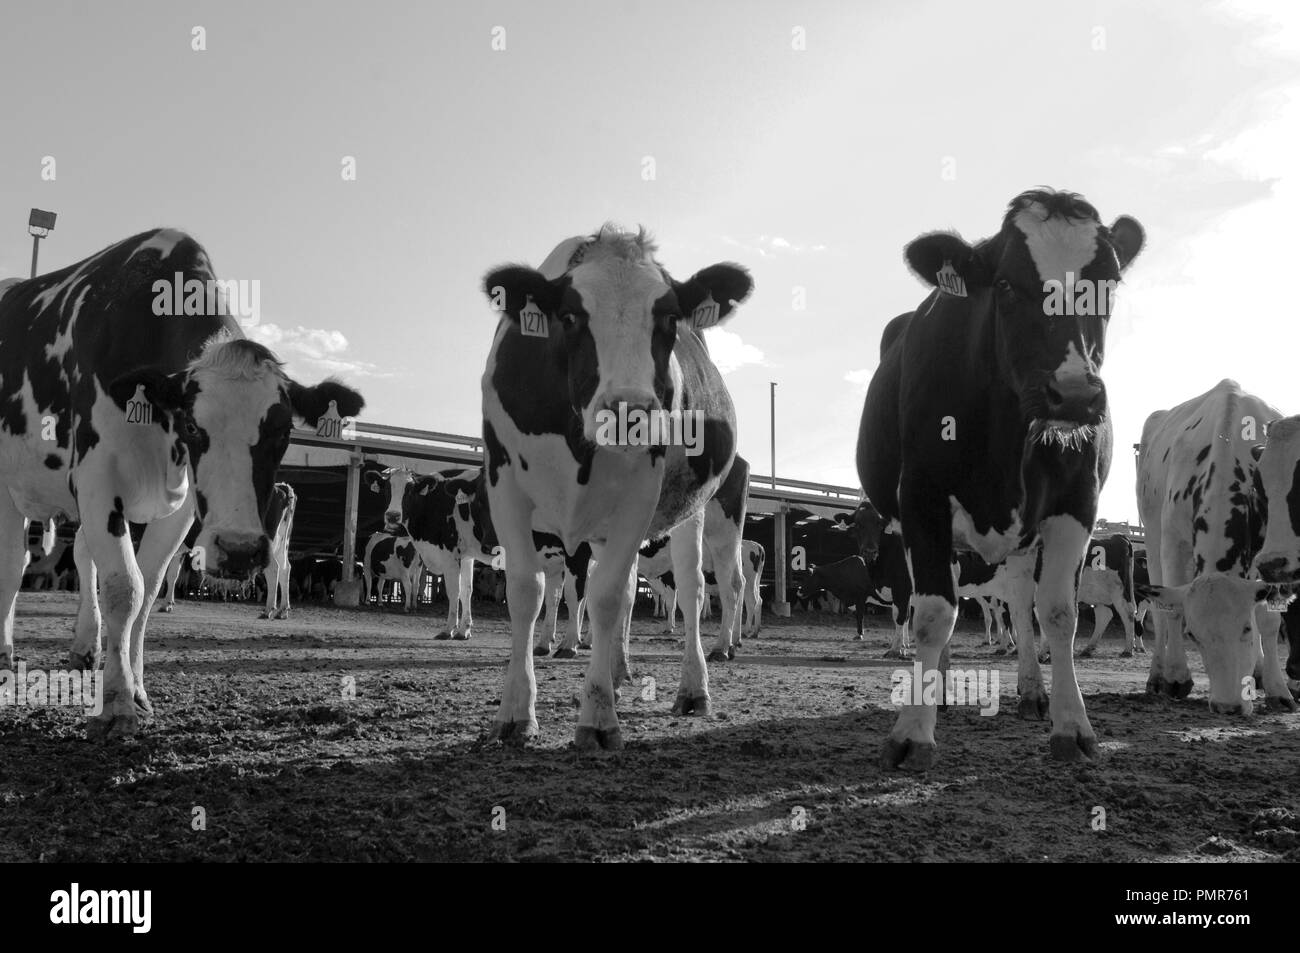 Cows in a farm of dairy plant on a sunny day in black & white Stock Photo